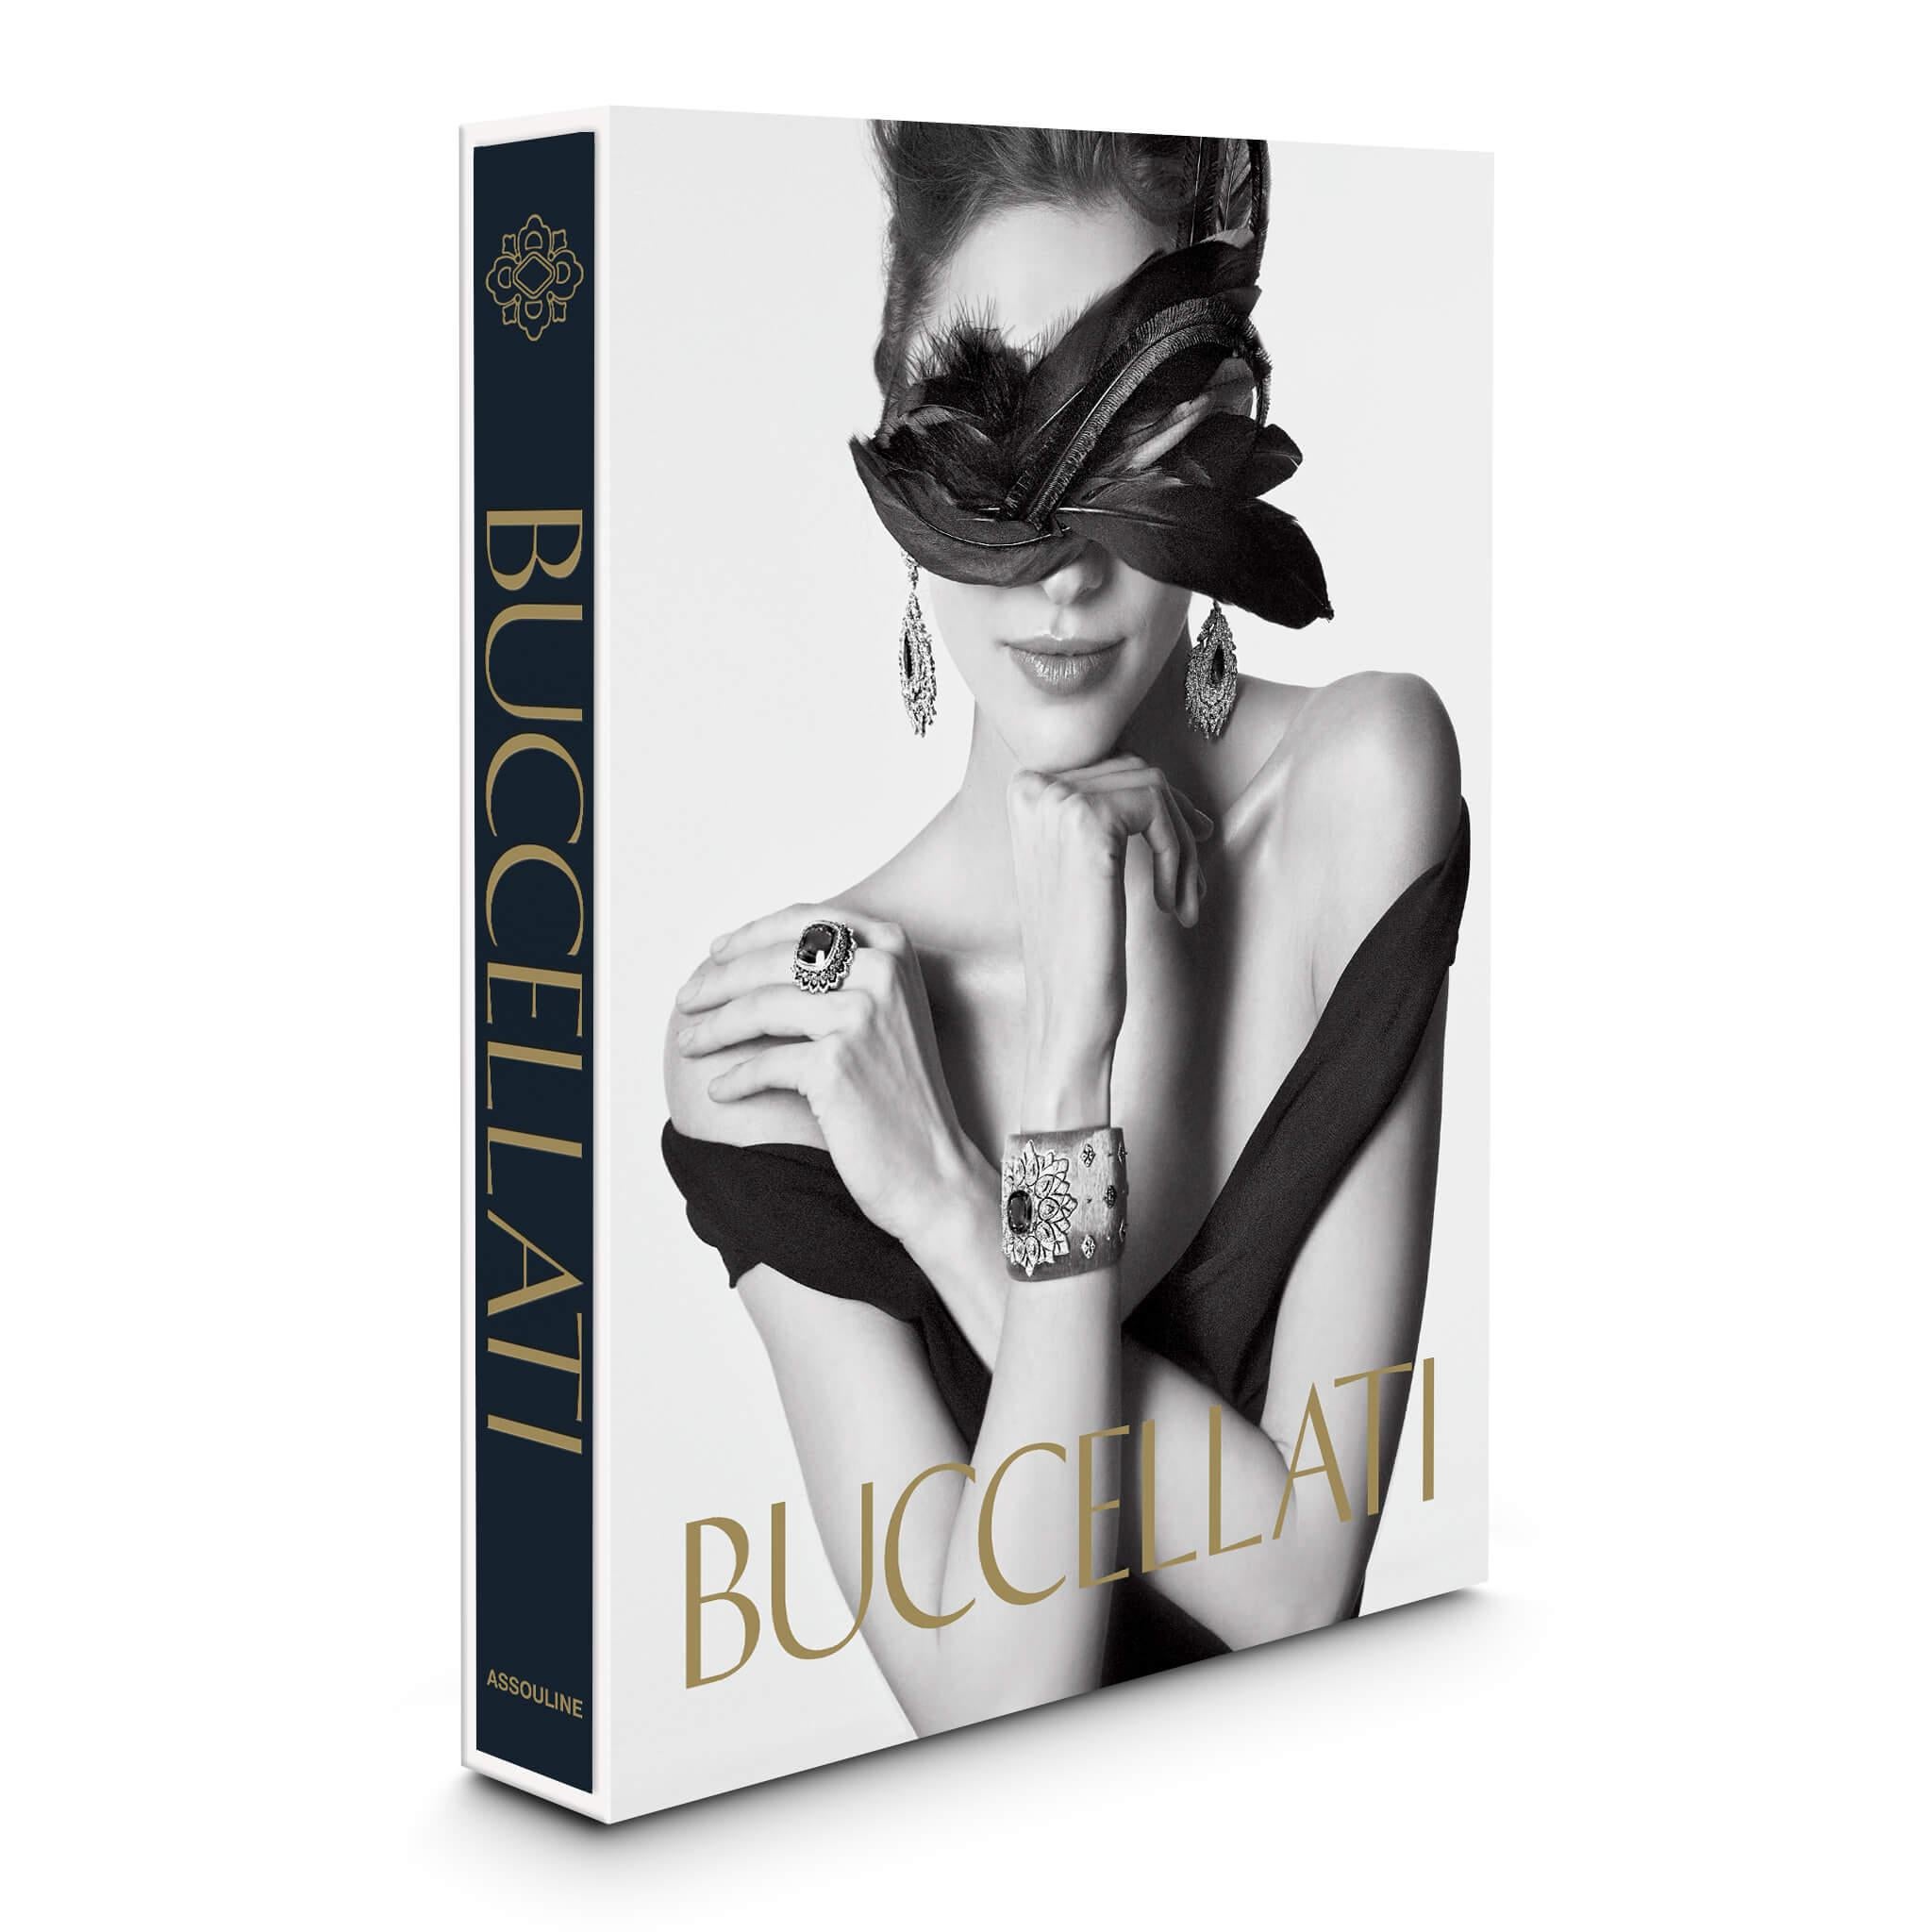 Since its establishment in Milan in 1919 by Mario Buccellati, a jeweler’s apprentice, the famed Italian jewelry house has developed and perfected its unique goldsmithing techniques over a century. Buccellati quickly became one of Italy’s most